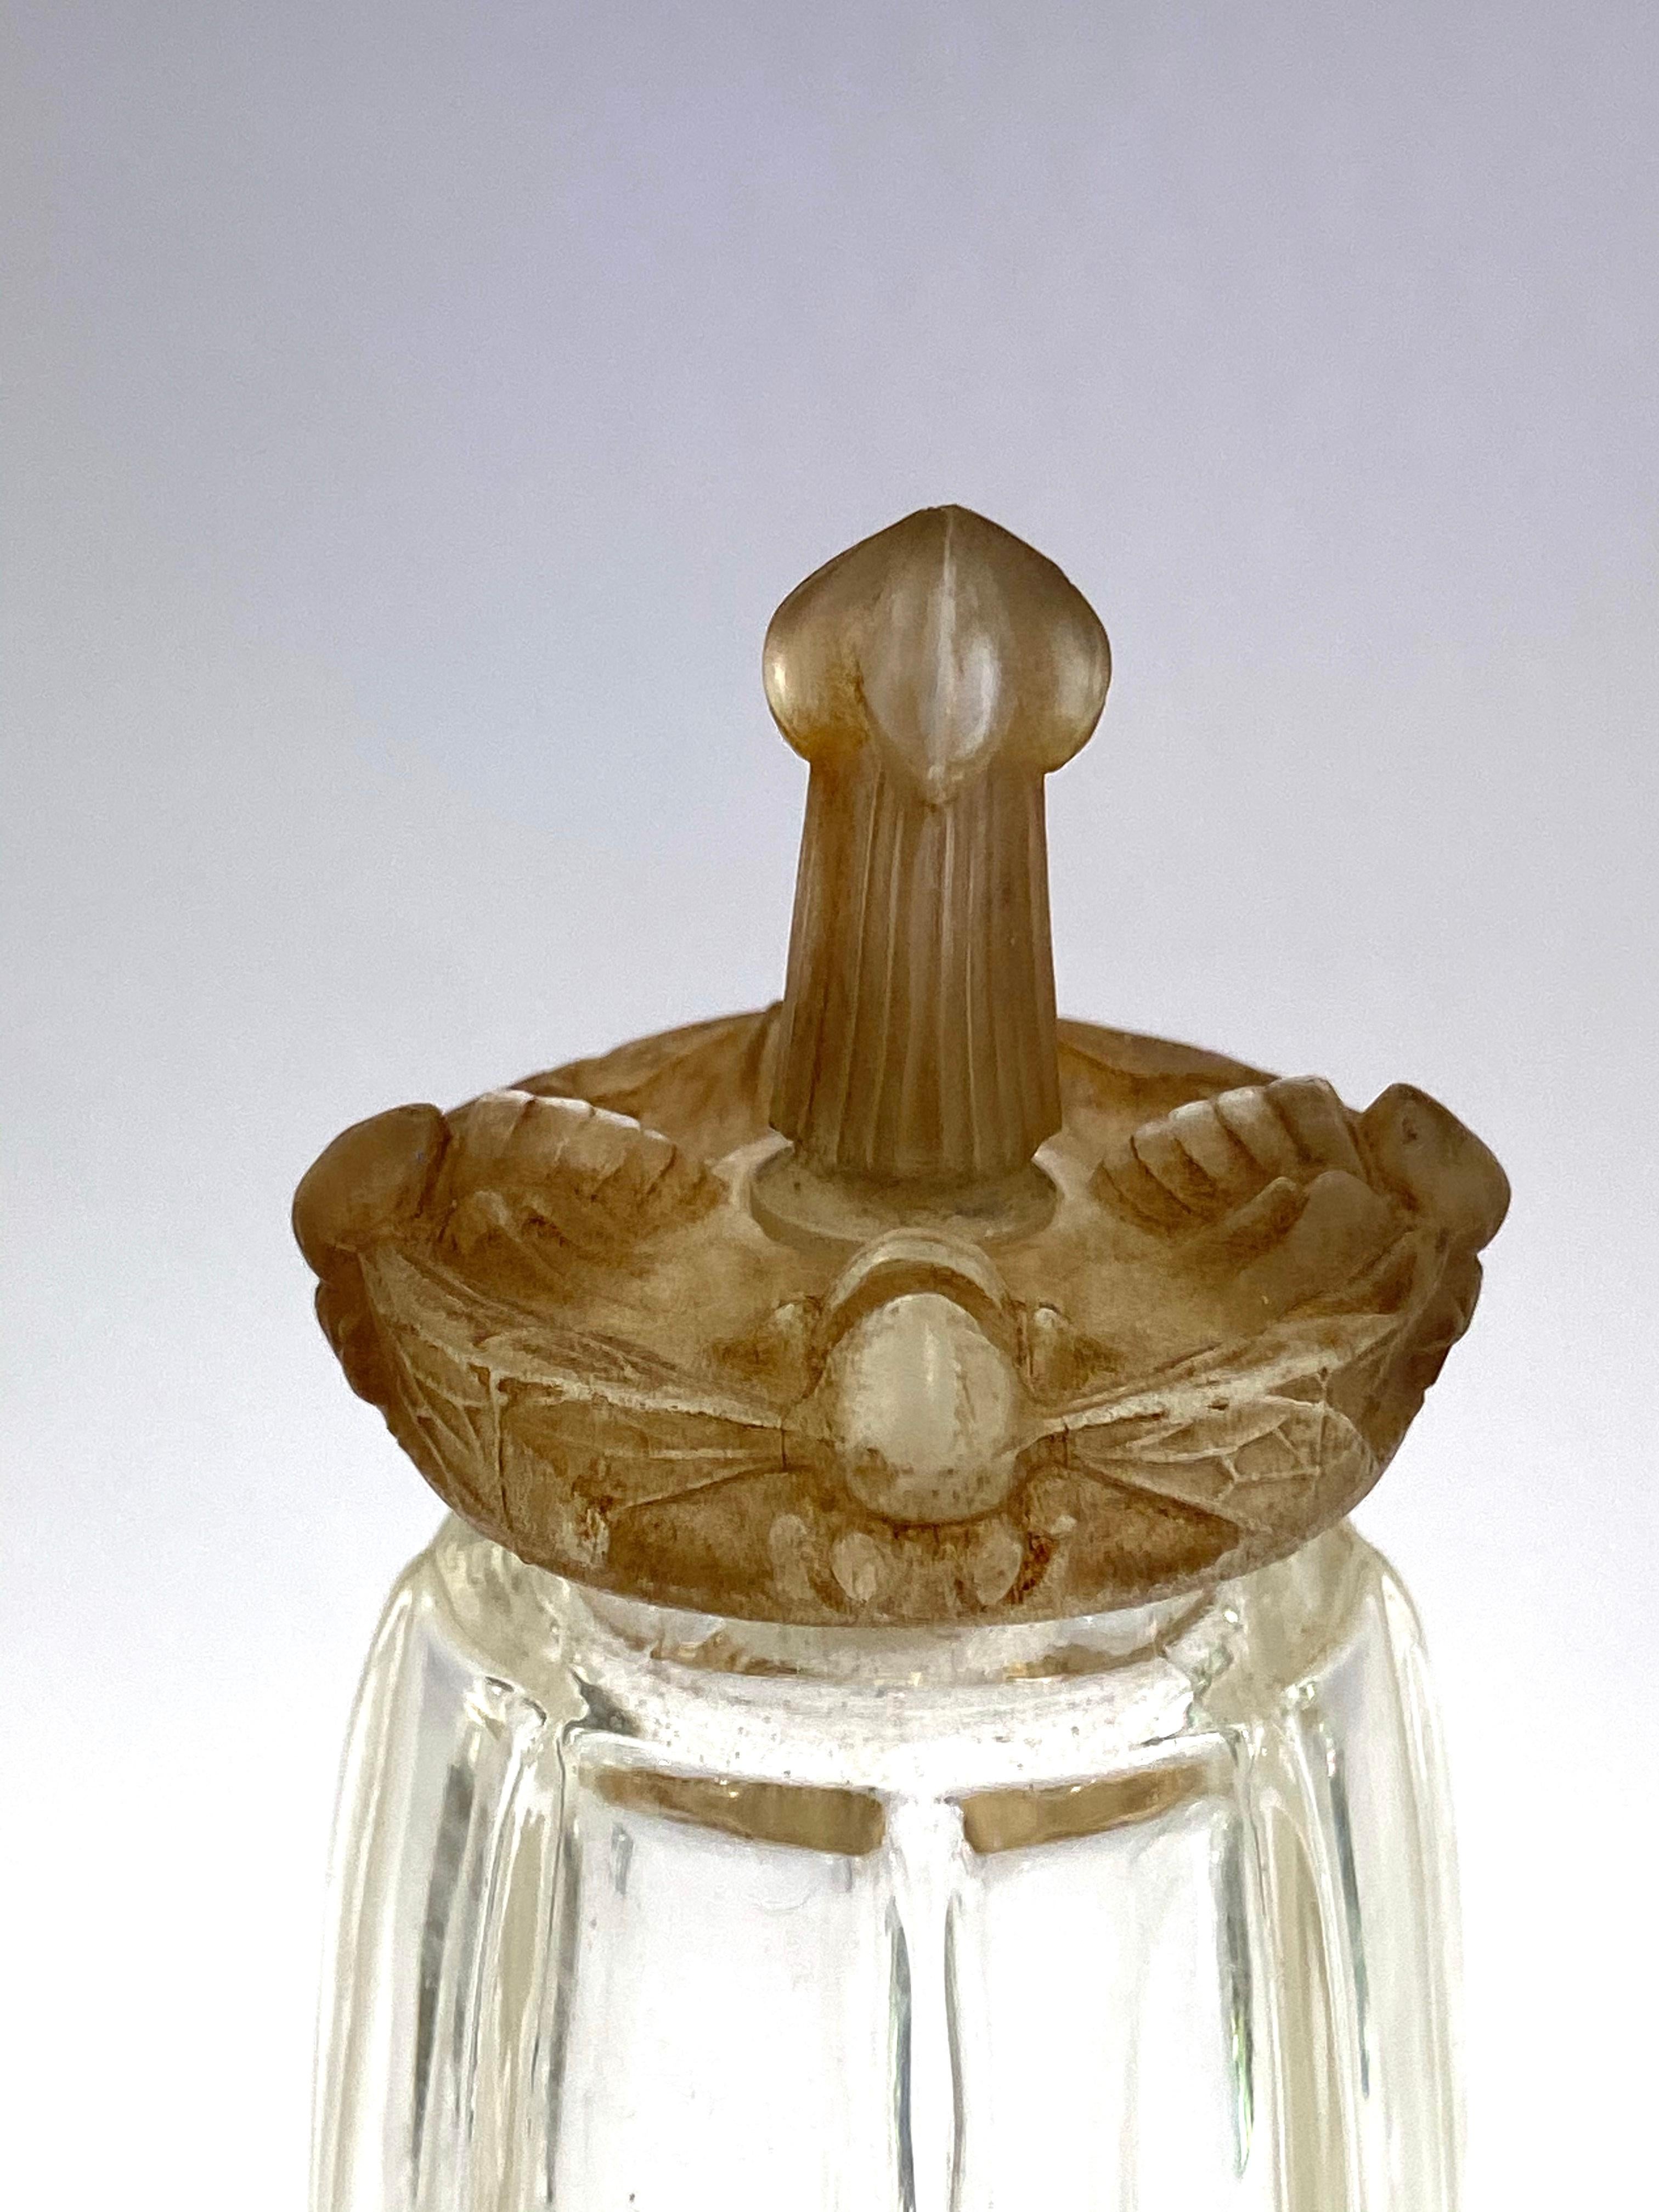 Early 20th Century 1911 Rene Lalique Styx for Coty Perfume Bottle Sepia Stained Glass Wasps